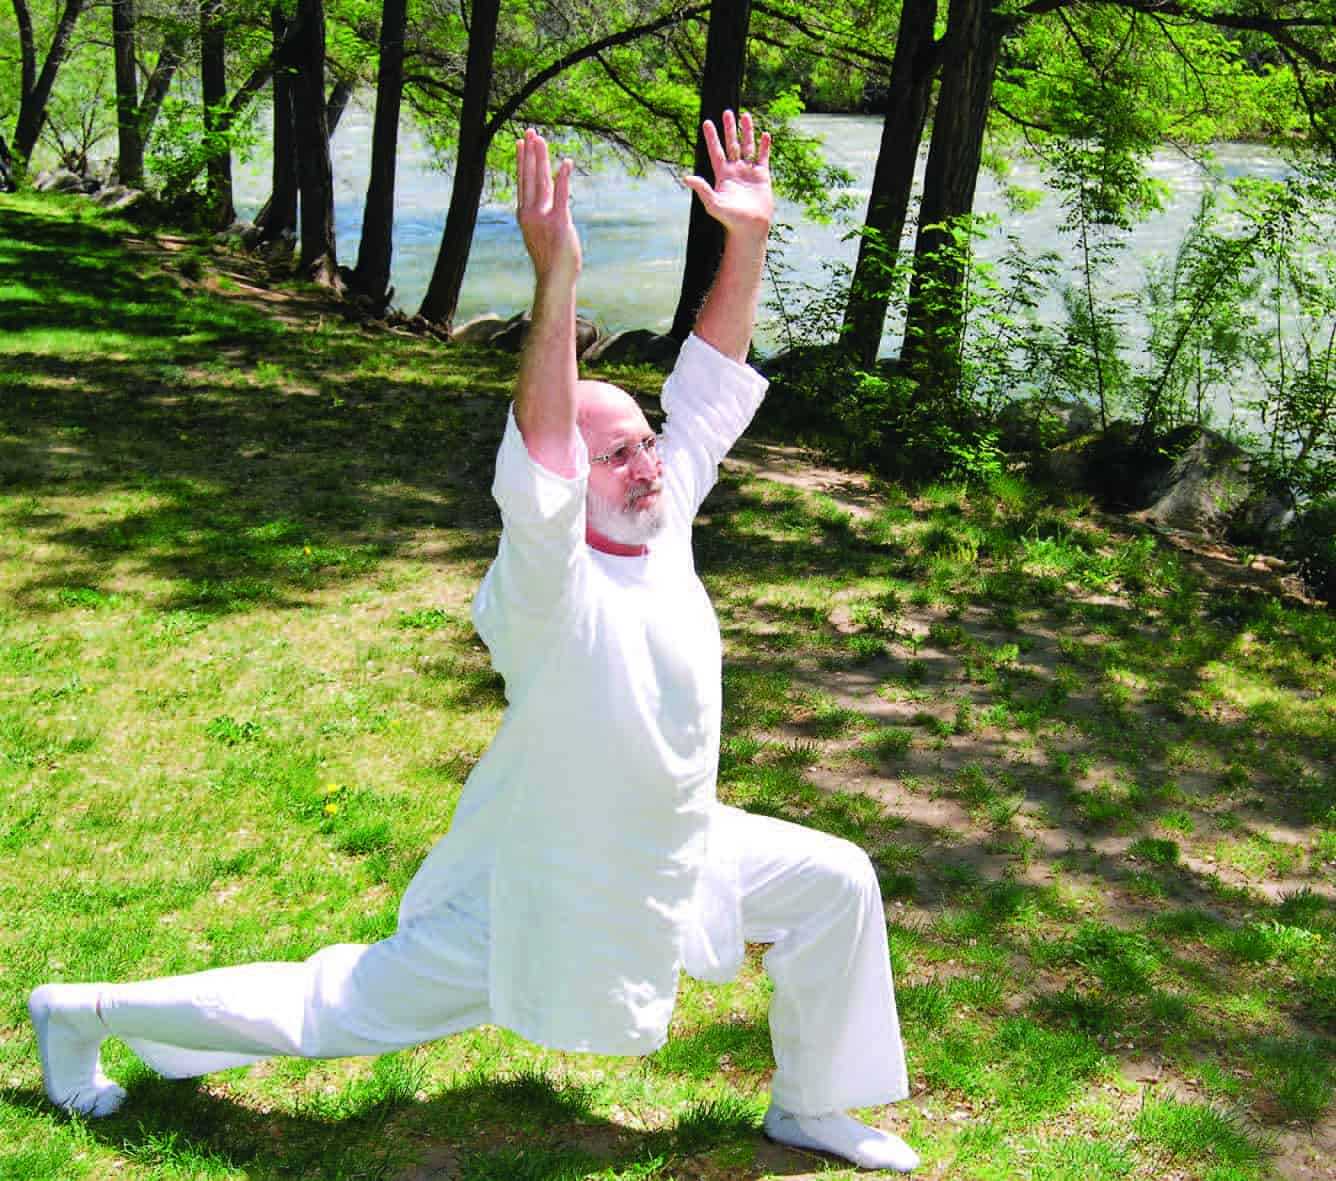 Tod is a caregiver that uses yoga daily as a way to relieve stress and take some time for himself.